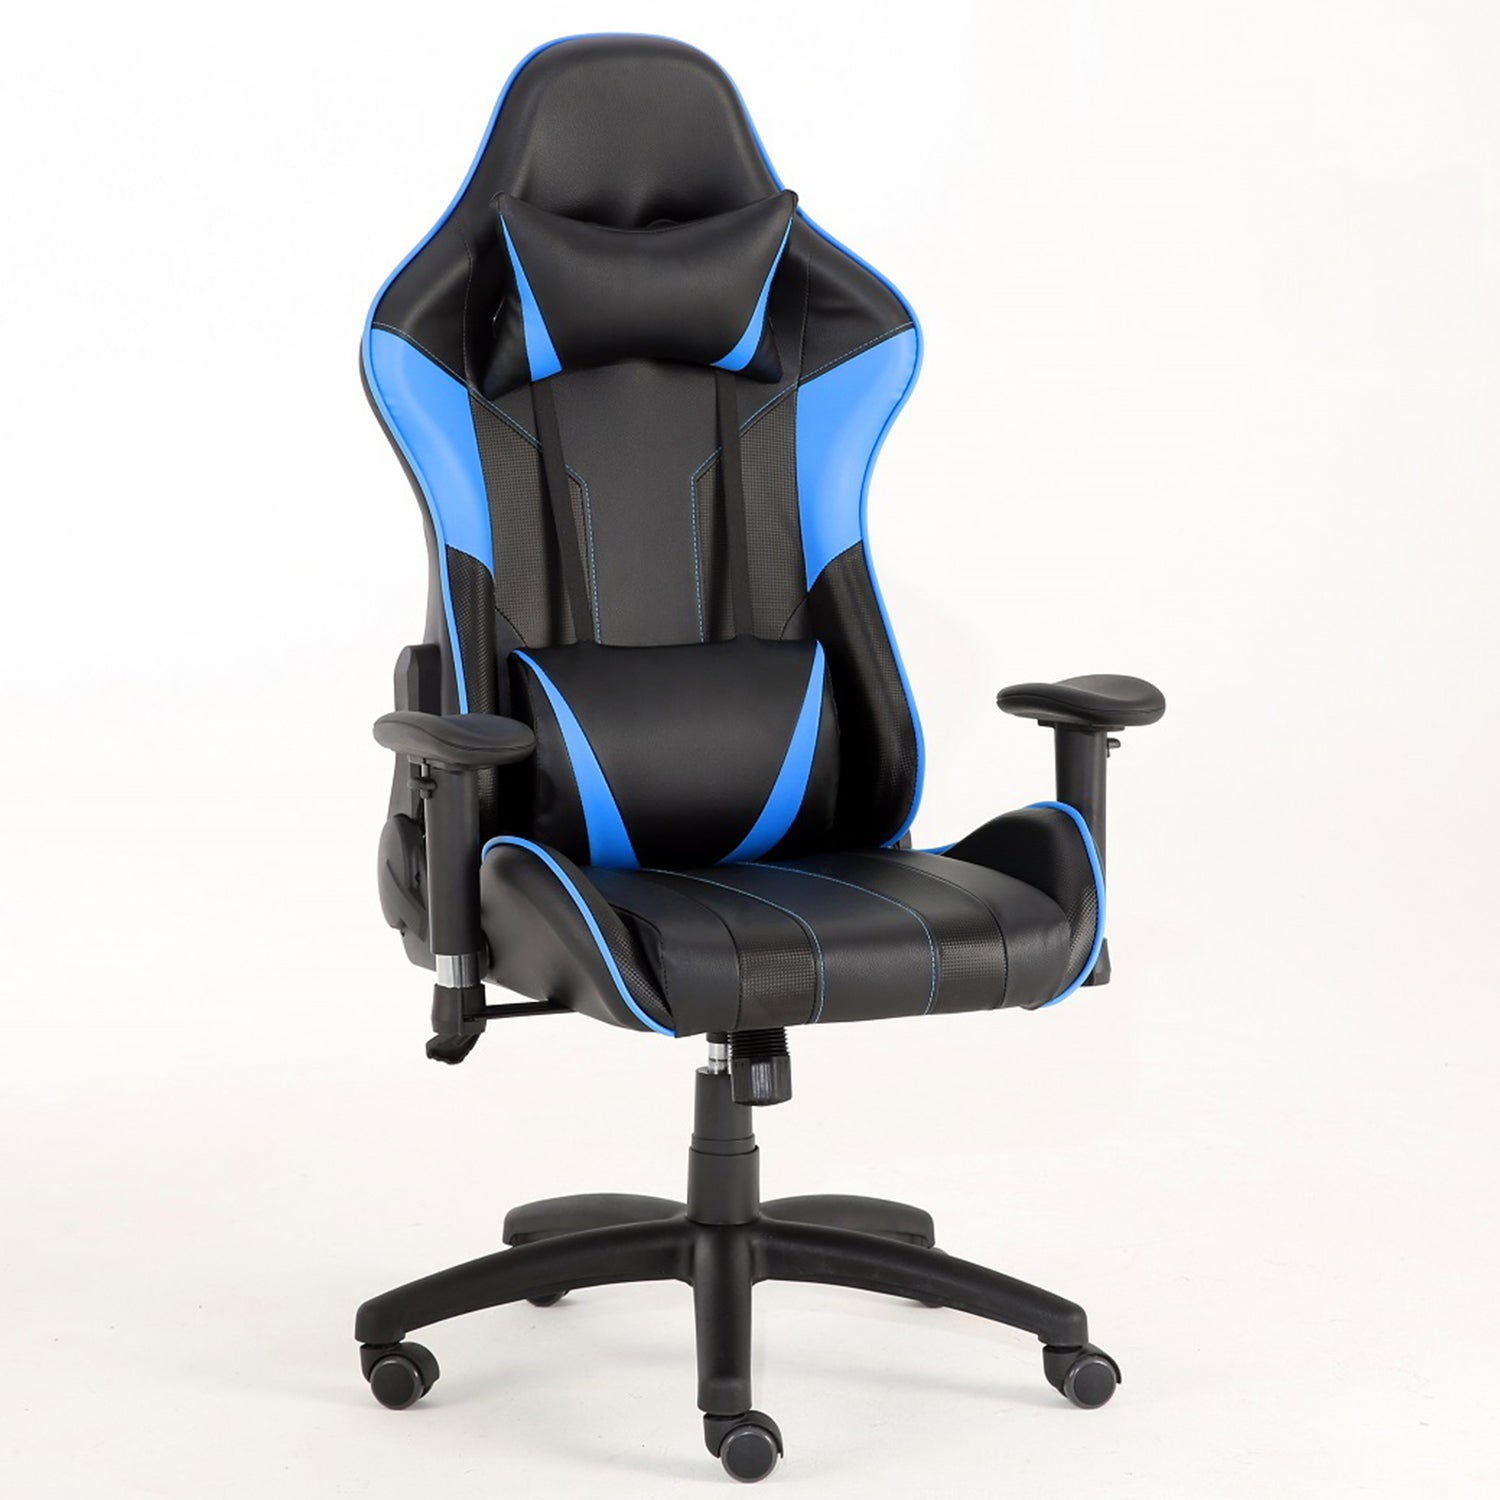 SUGIFT Gaming Chairs, Office Swivel Chairs, with headrest and Lumbar Pillow, Blue